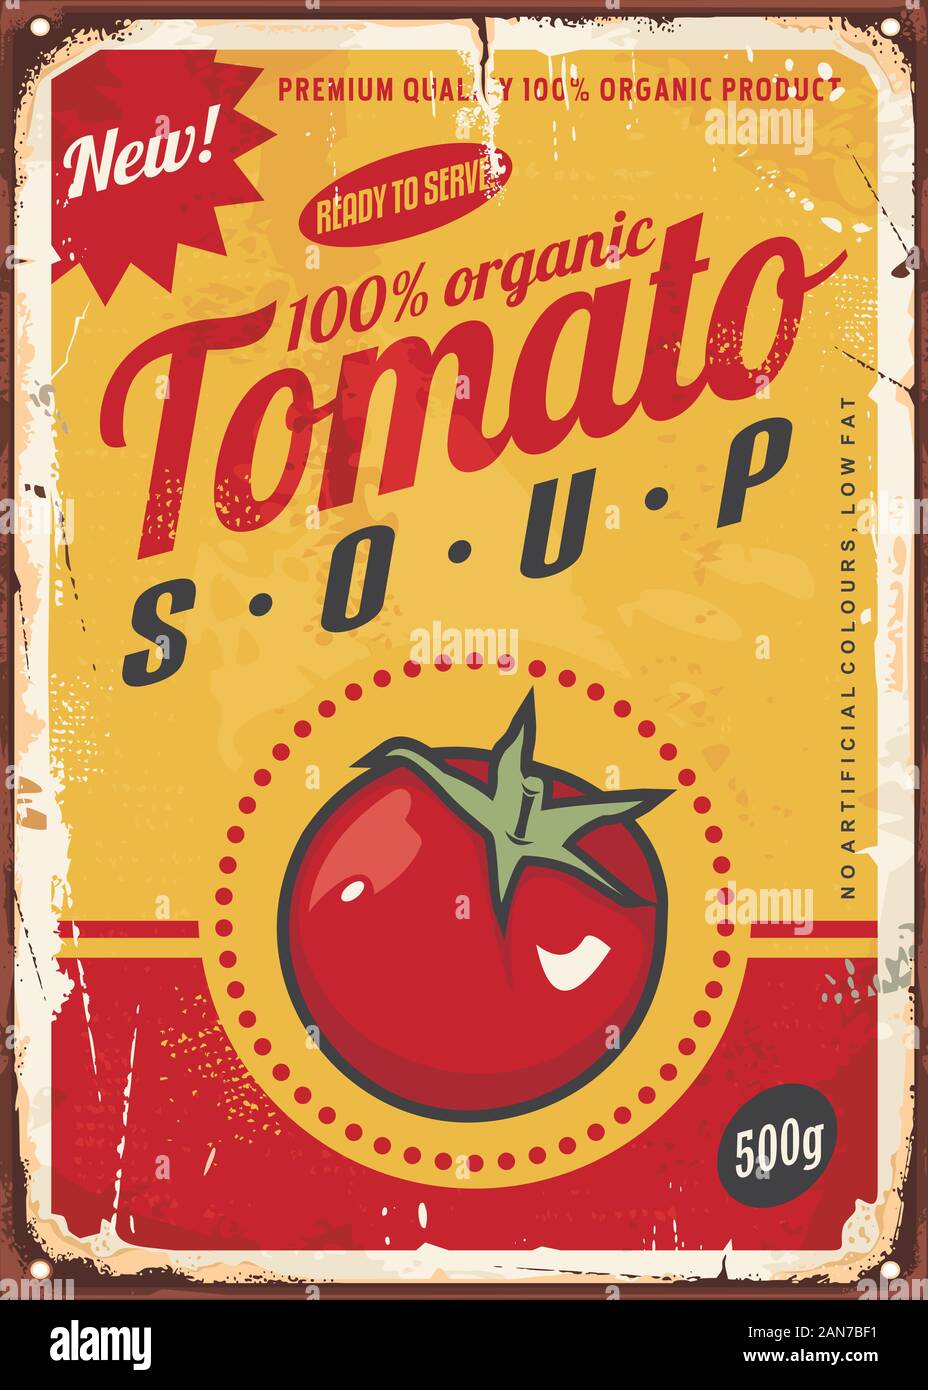 Tomato soup vintage metal sign image with juicy red tomato and creative typography. Promotional food ad design concept. Vector illustration Stock Vector